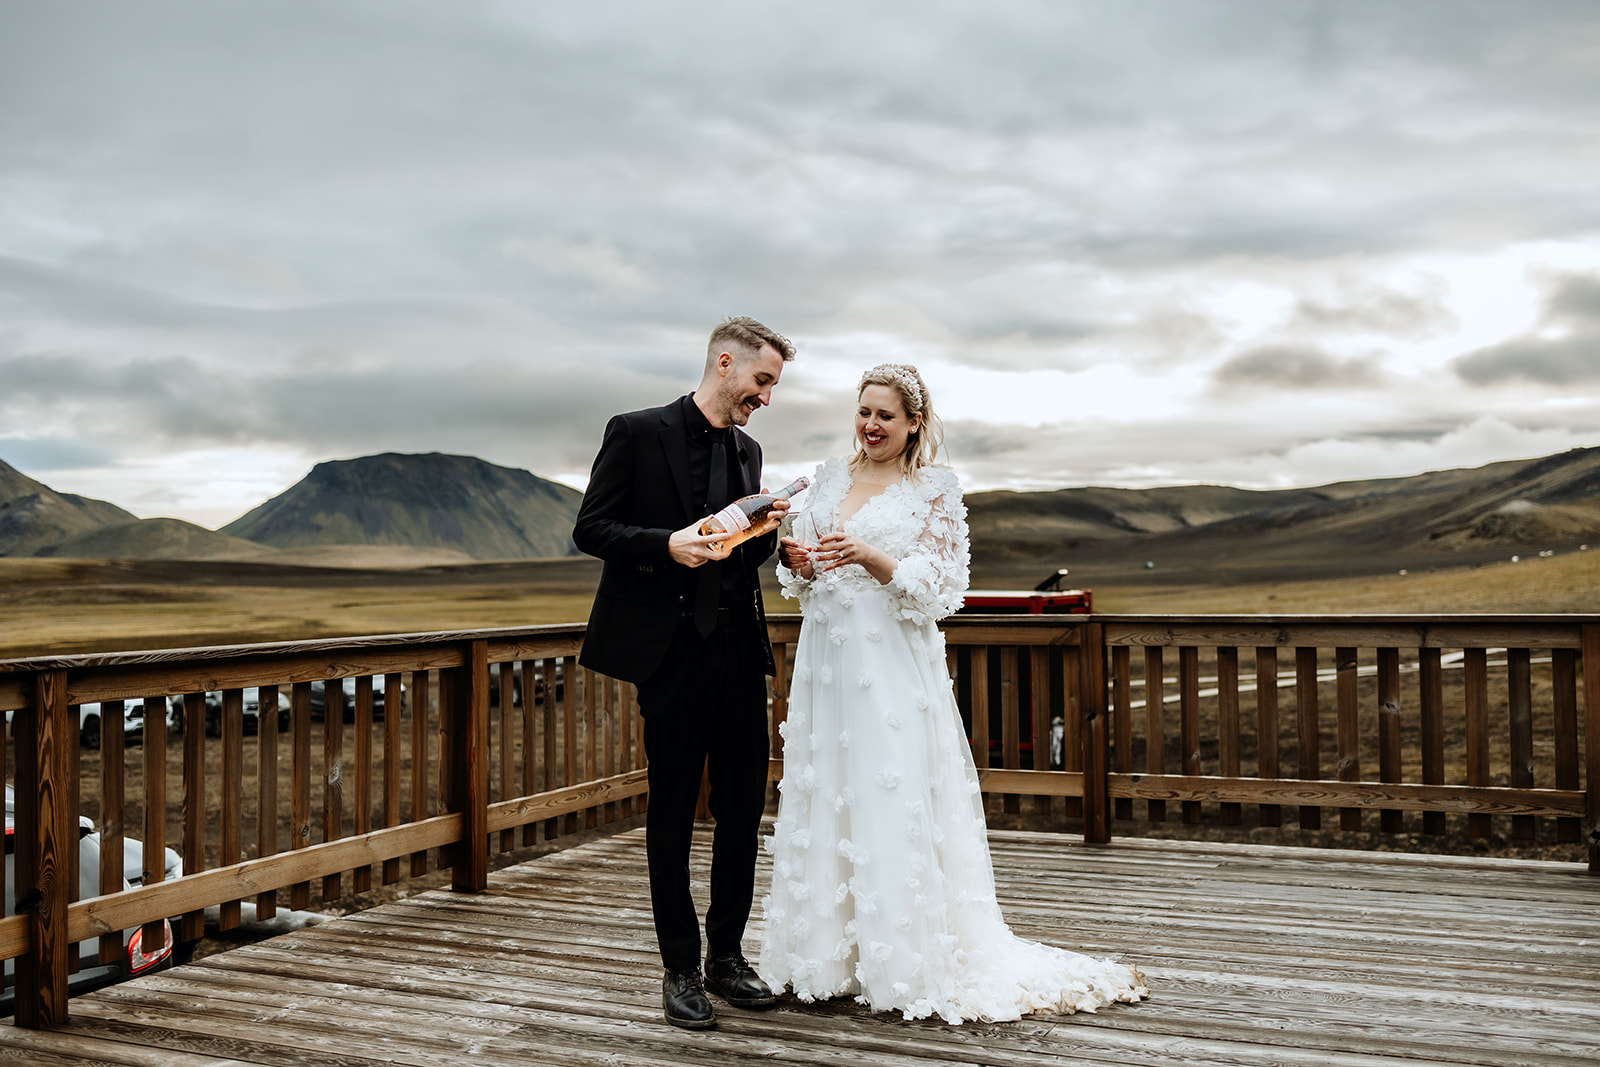 Bride and Groom are celebrating the end of their wedding day in Iceland with a bottle of champagne